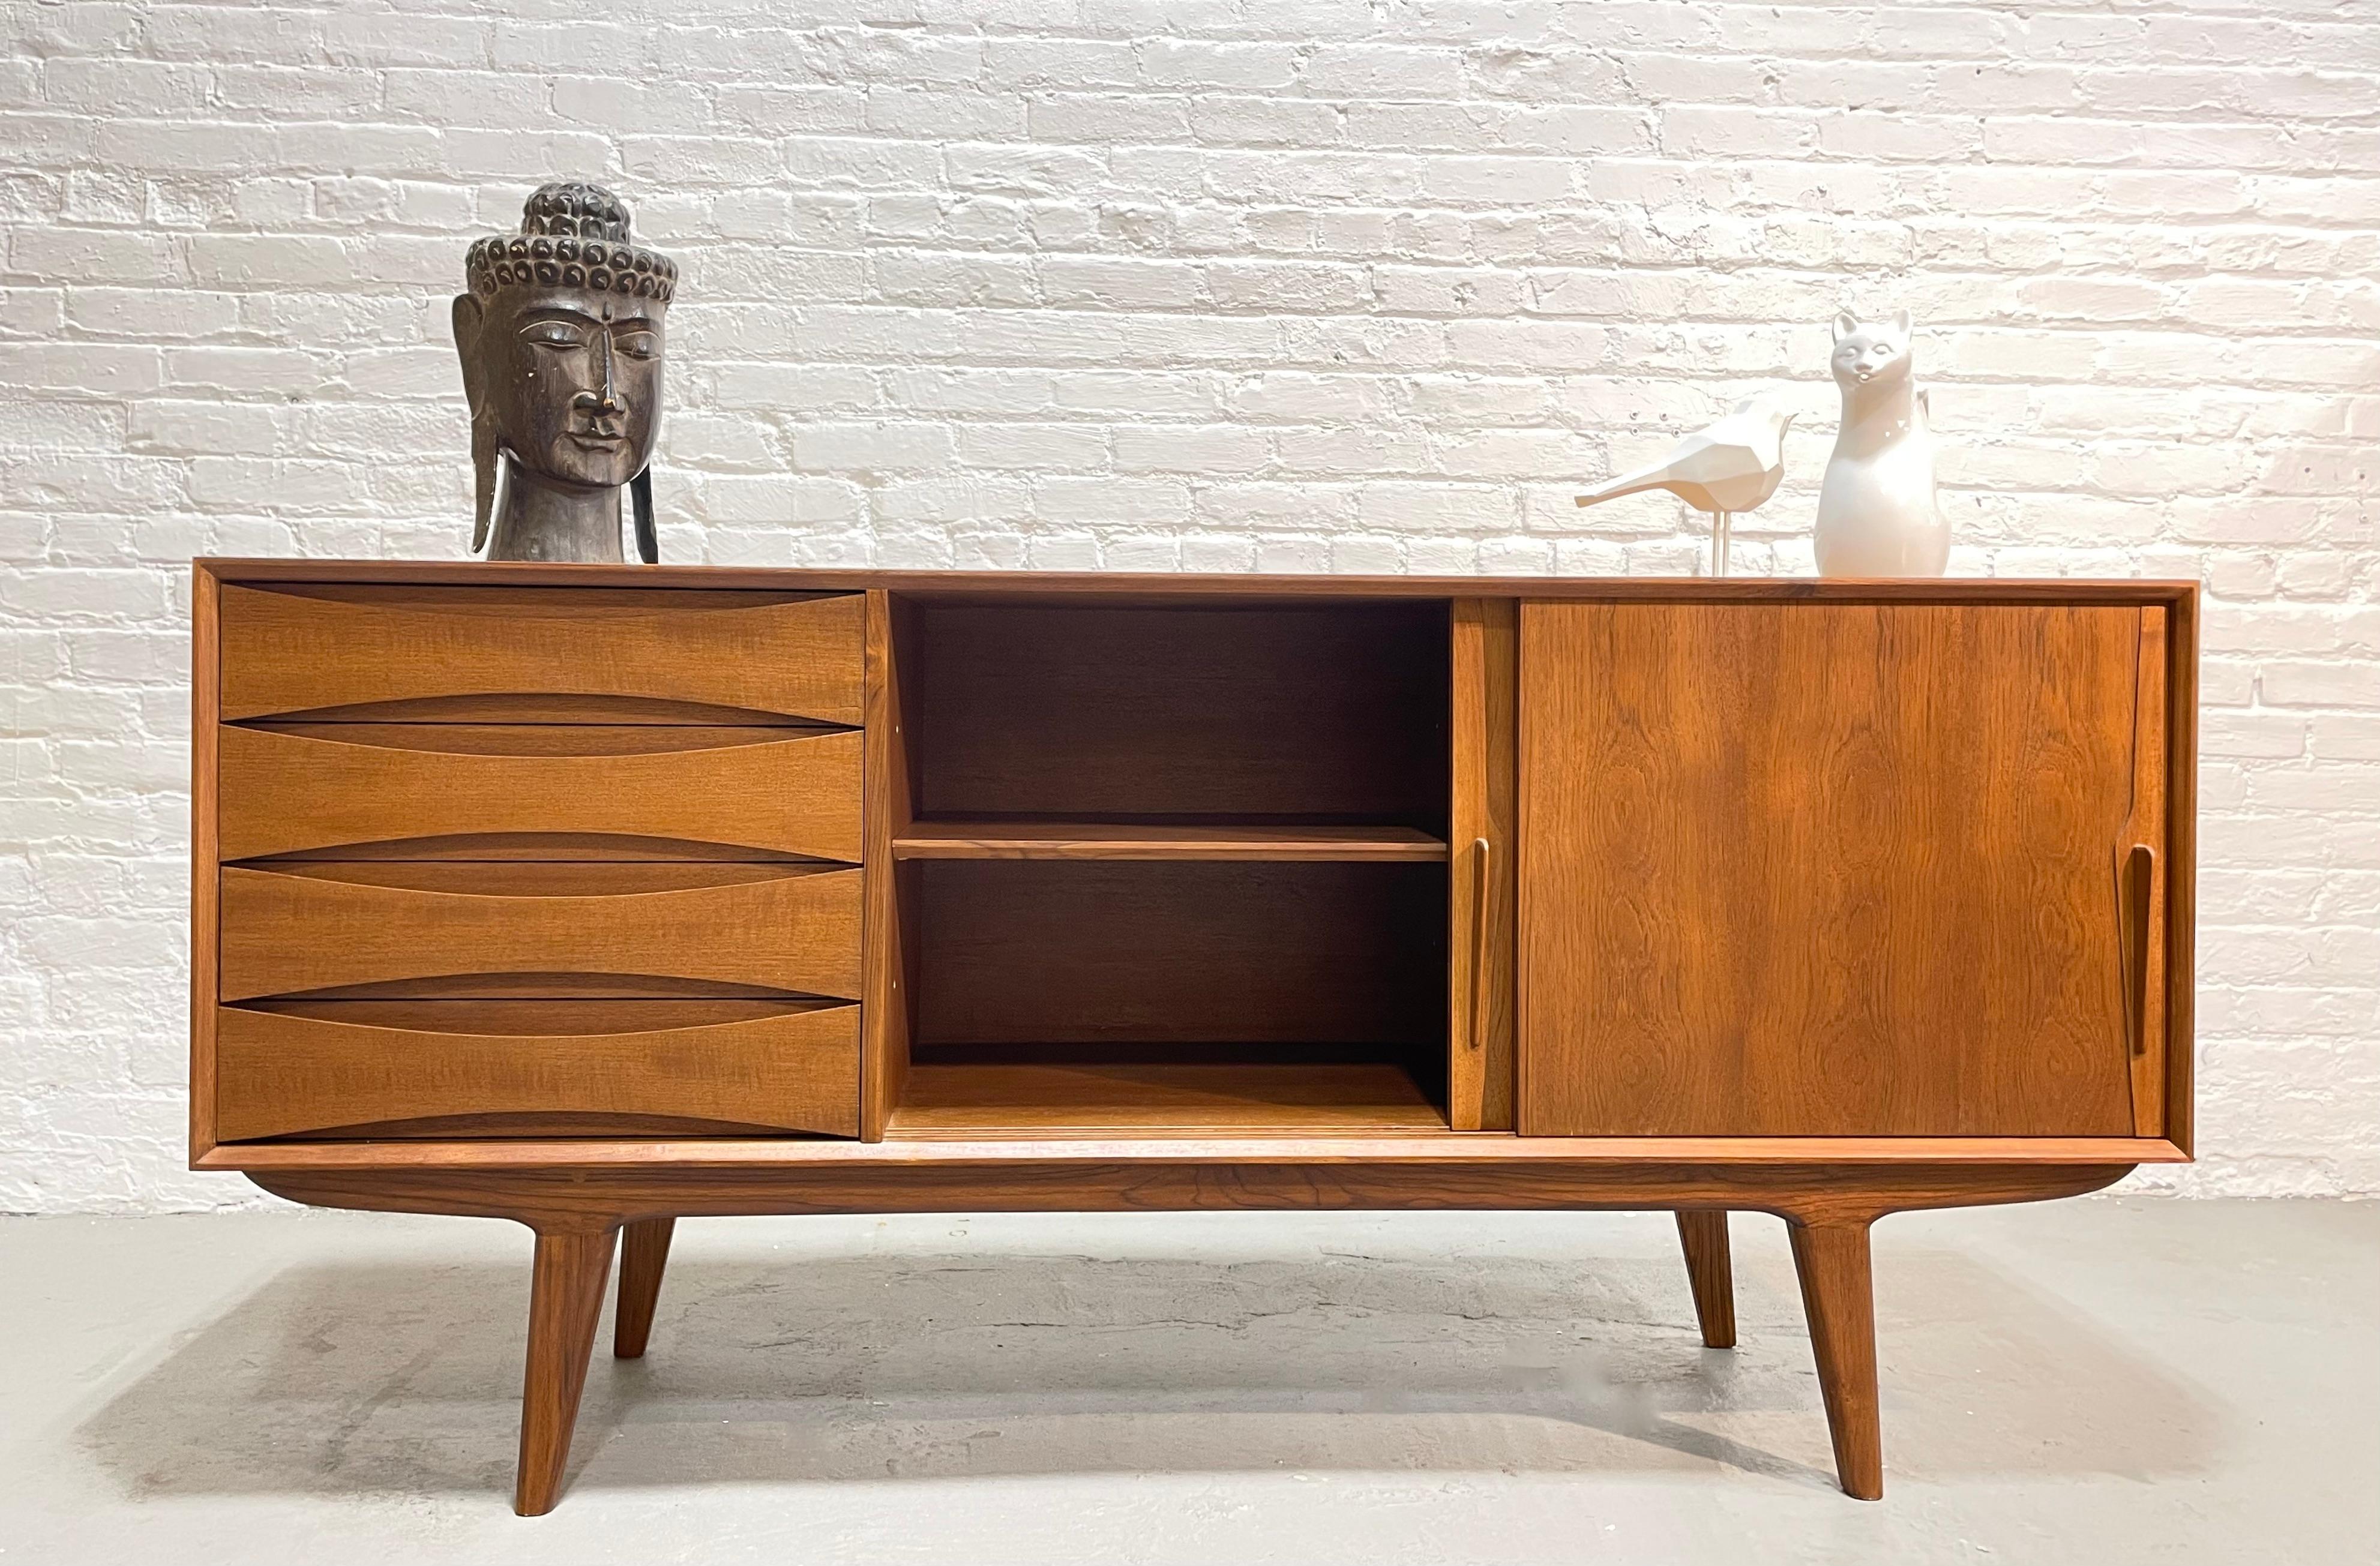  Handsome Mid Century MODERN styled SIDEBOARD / CREDENZA media stand 1